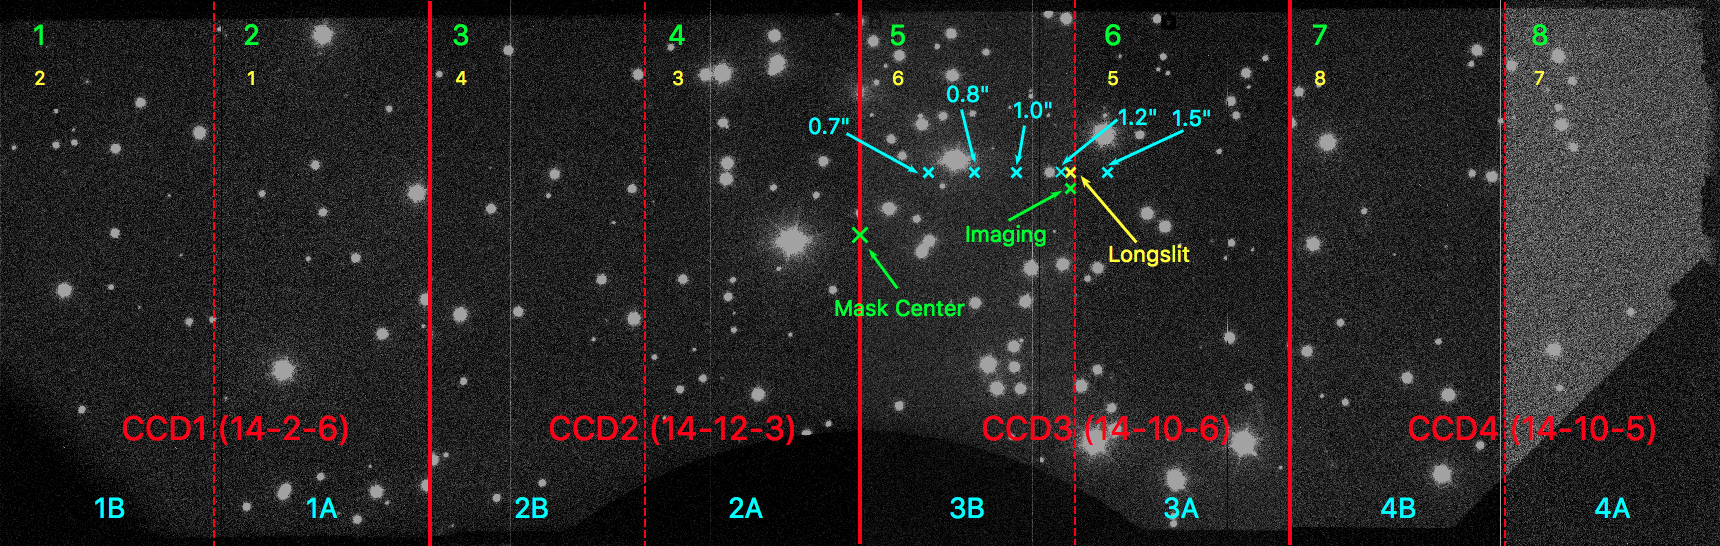 POs and CCD naming on M67 image